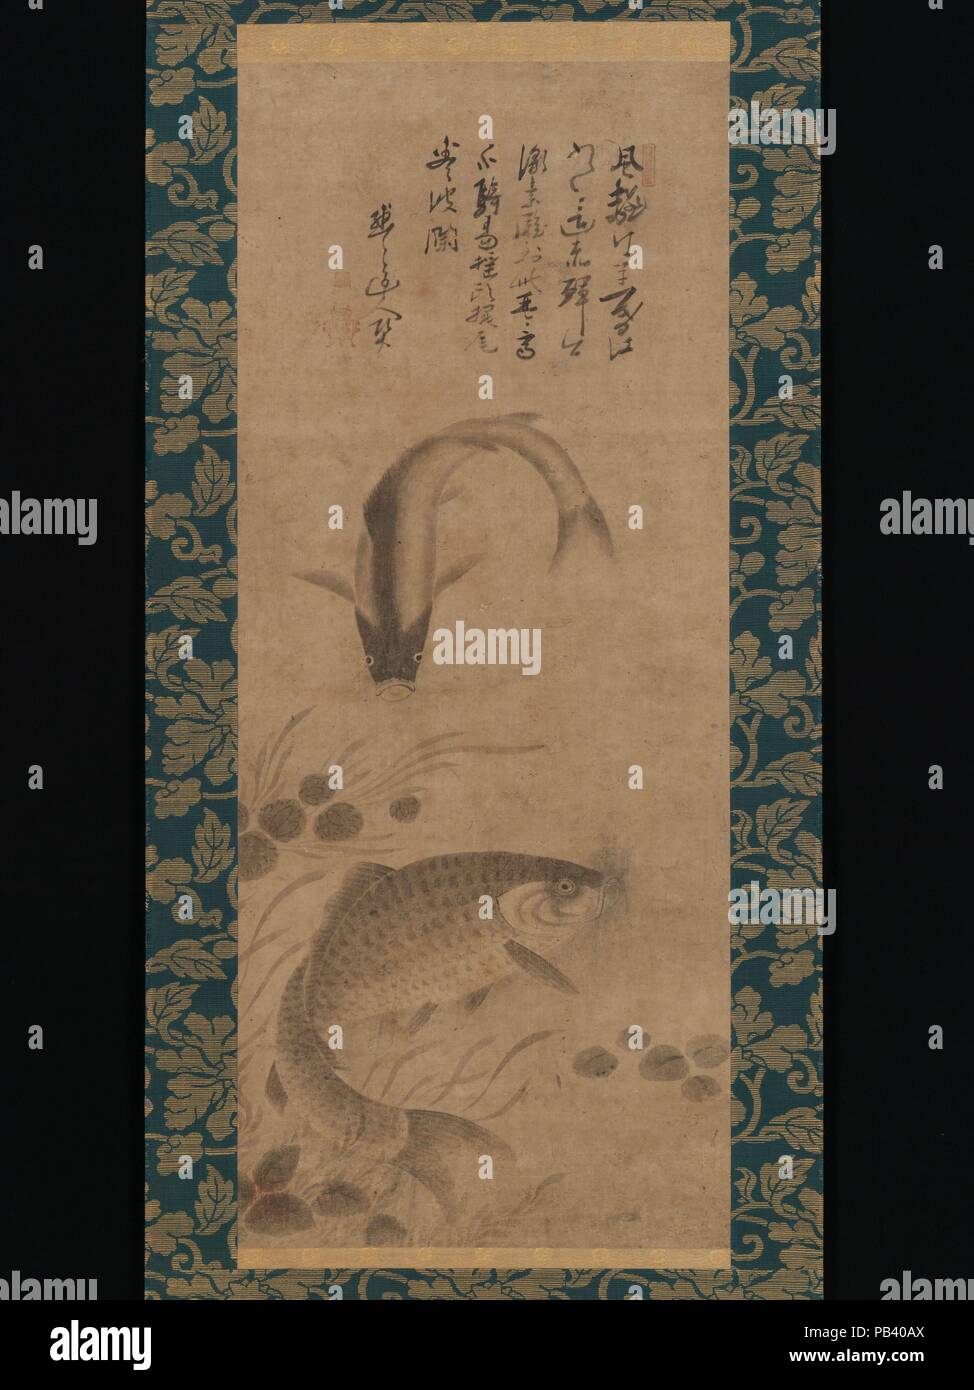 Carp and Waterweeds. Artist: Yogetsu (Japanese, active late 15th century); Inscribed by Mokumoku Dojin (Japanese, active late 15th century). Culture: Japan. Dimensions: Image: 33 7/16 × 13 7/8 in. (85 × 35.2 cm)  Overall with mounting: 65 3/4 × 19 1/16 in. (167 × 48.4 cm)  Overall with knobs: 65 3/4 × 20 7/8 in. (167 × 53 cm). Date: late 15th century.  Little is known about Yogetsu, who was active as a monk in the mountains northeast of the ancient capital of Nara. He is sometimes cited as a follower of the master painter Sesshu Toyo (1420-1506). Above Yogetsu's auspicious image of a pair of f Stock Photo